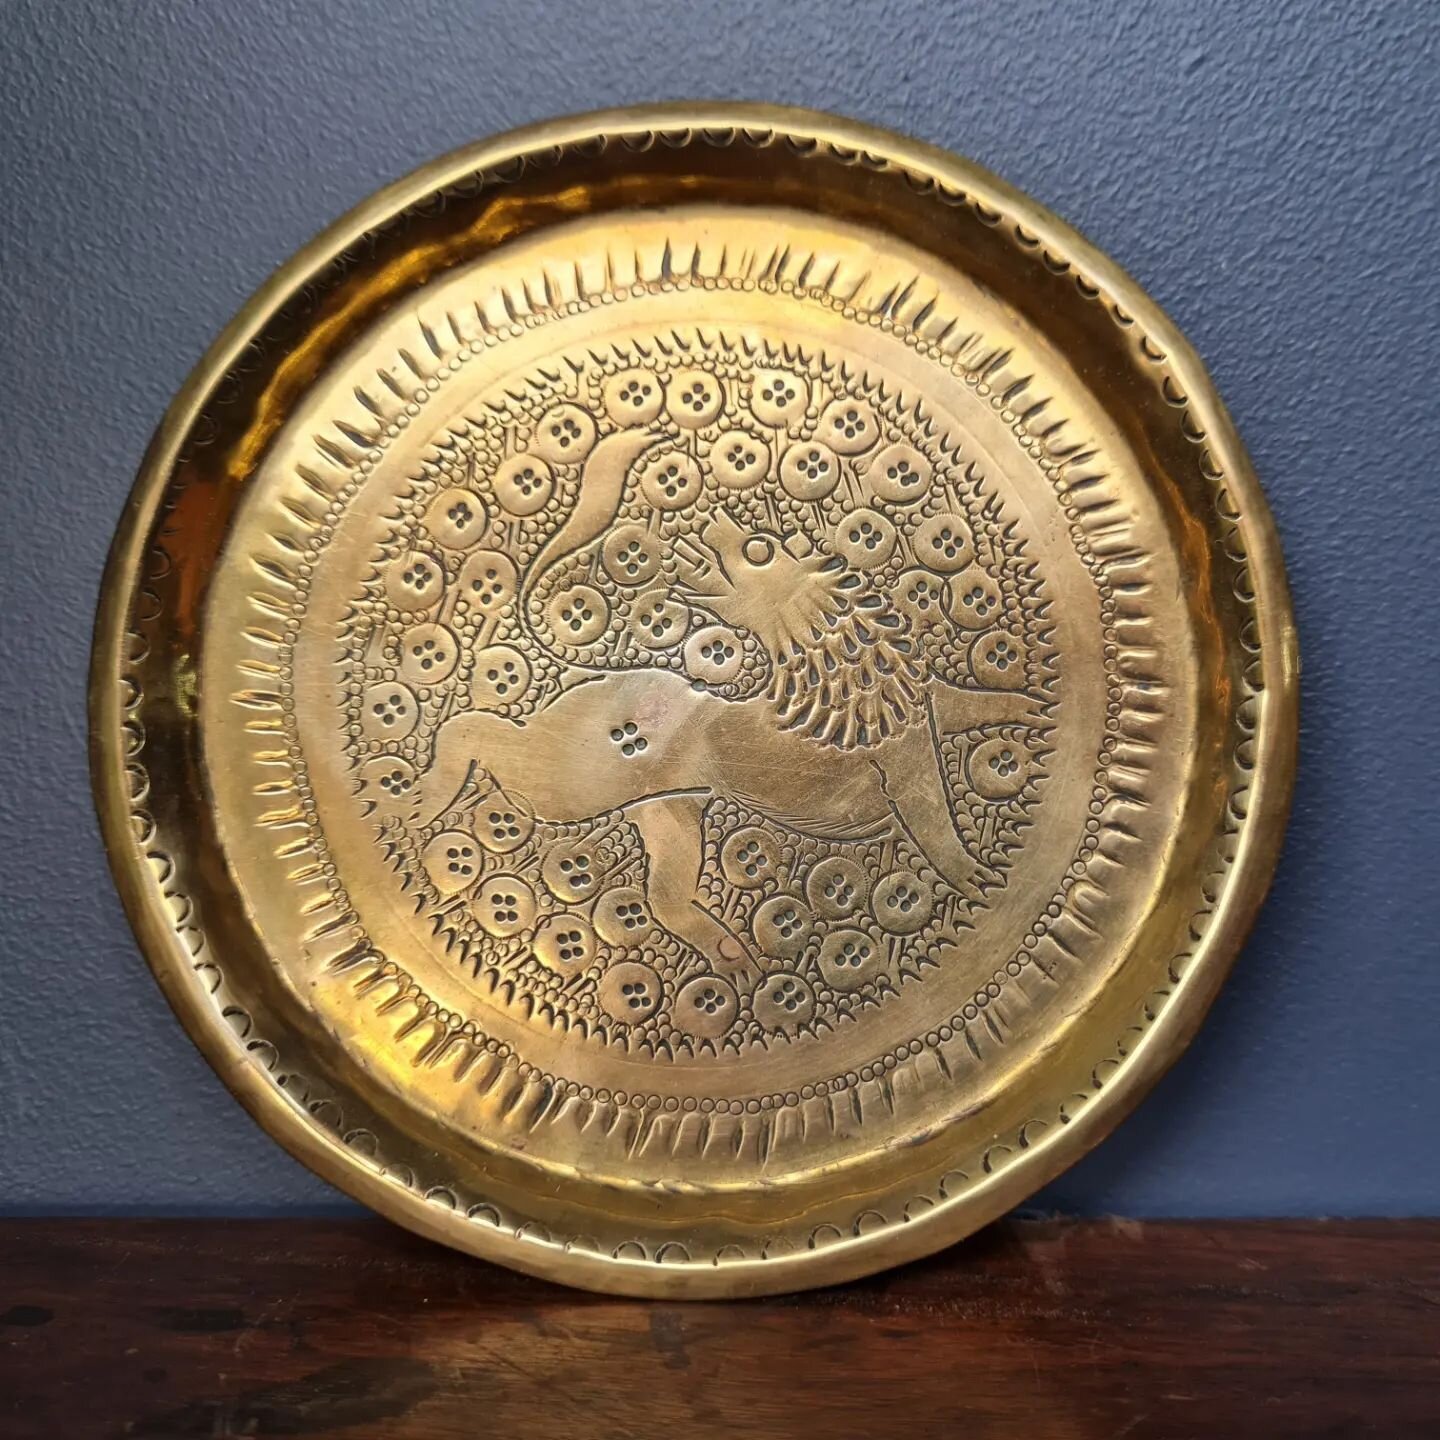 Love this little Persian brass tray with a lion to the centre.&nbsp; It is 136mm across &amp; has a good weight to it. $38.
Postage $9.70&nbsp; Australia wide.
Comment sold to purchase &amp; we will reply &amp; message to confirm.

We are happy to co